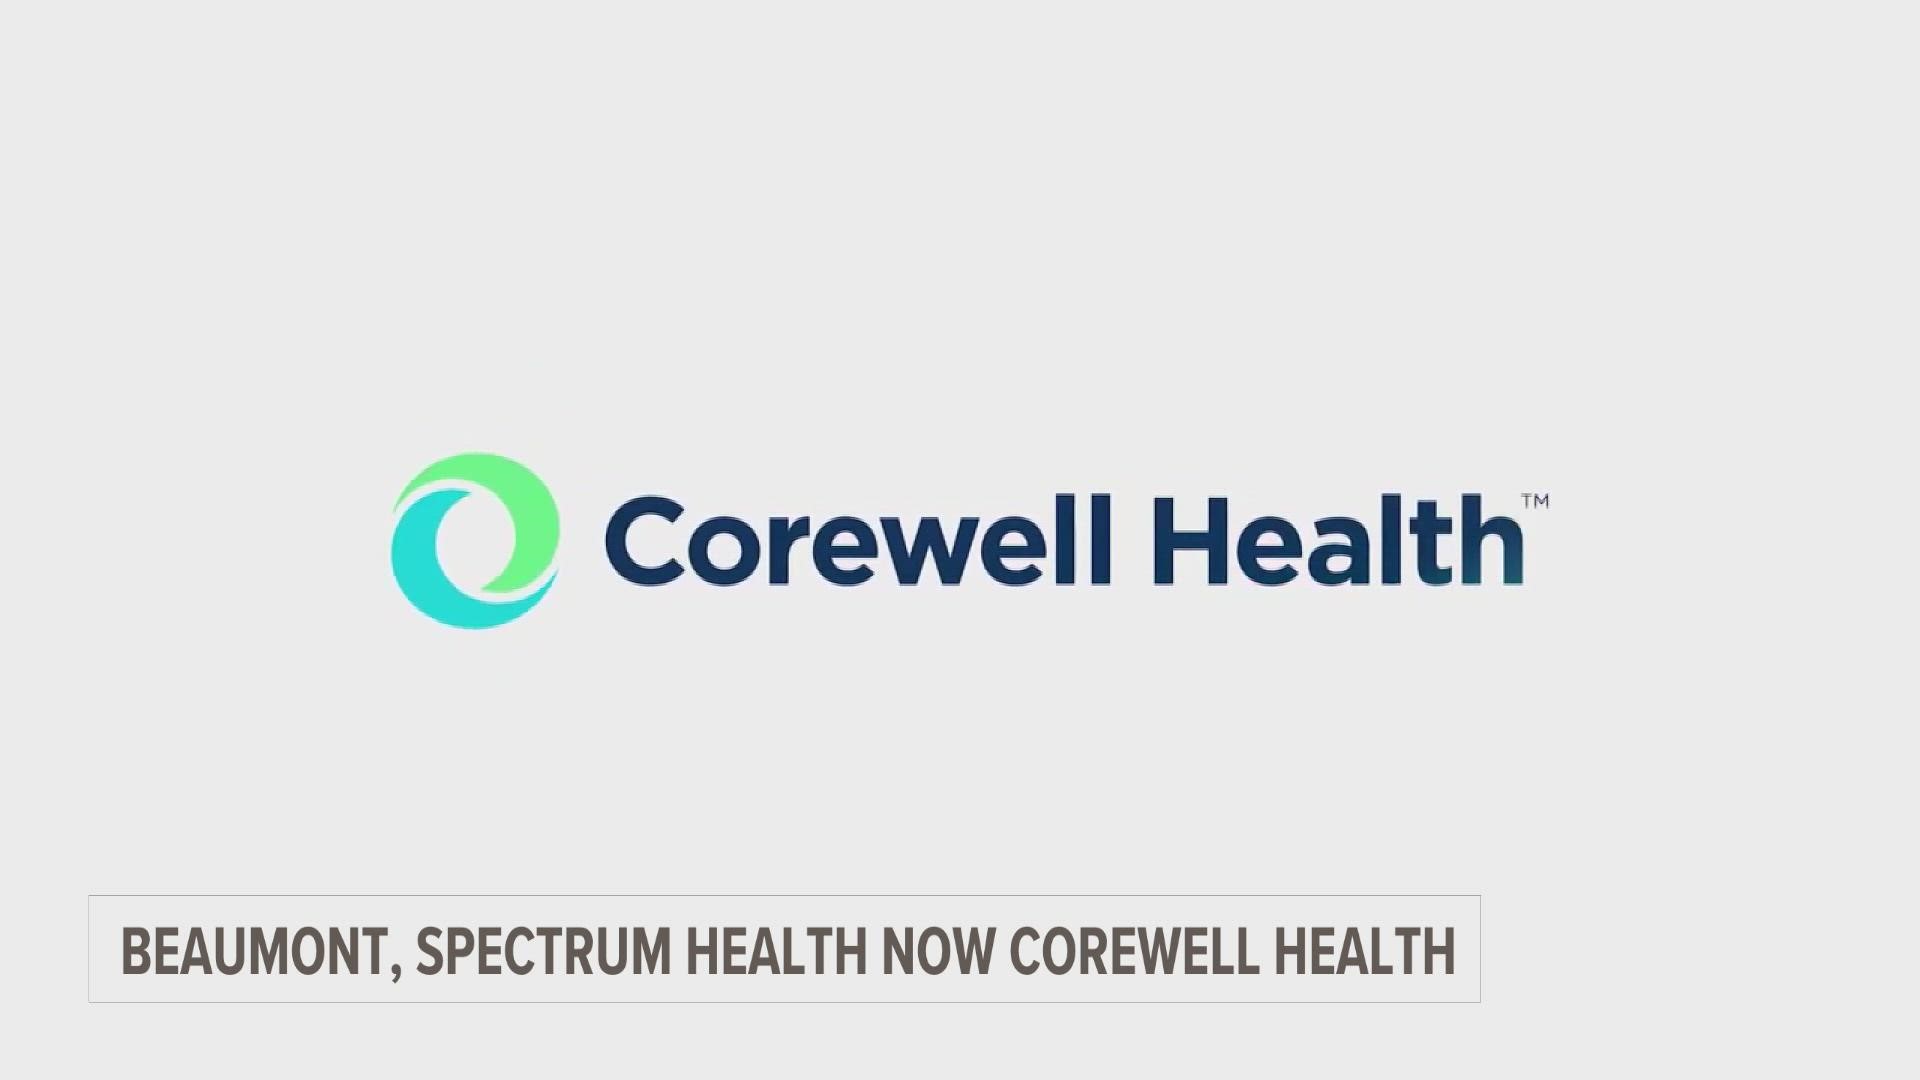 Earlier this year, Spectrum Health and Beaumont Health announced they were merging into one system. Now, they have a name: Corewell Health.